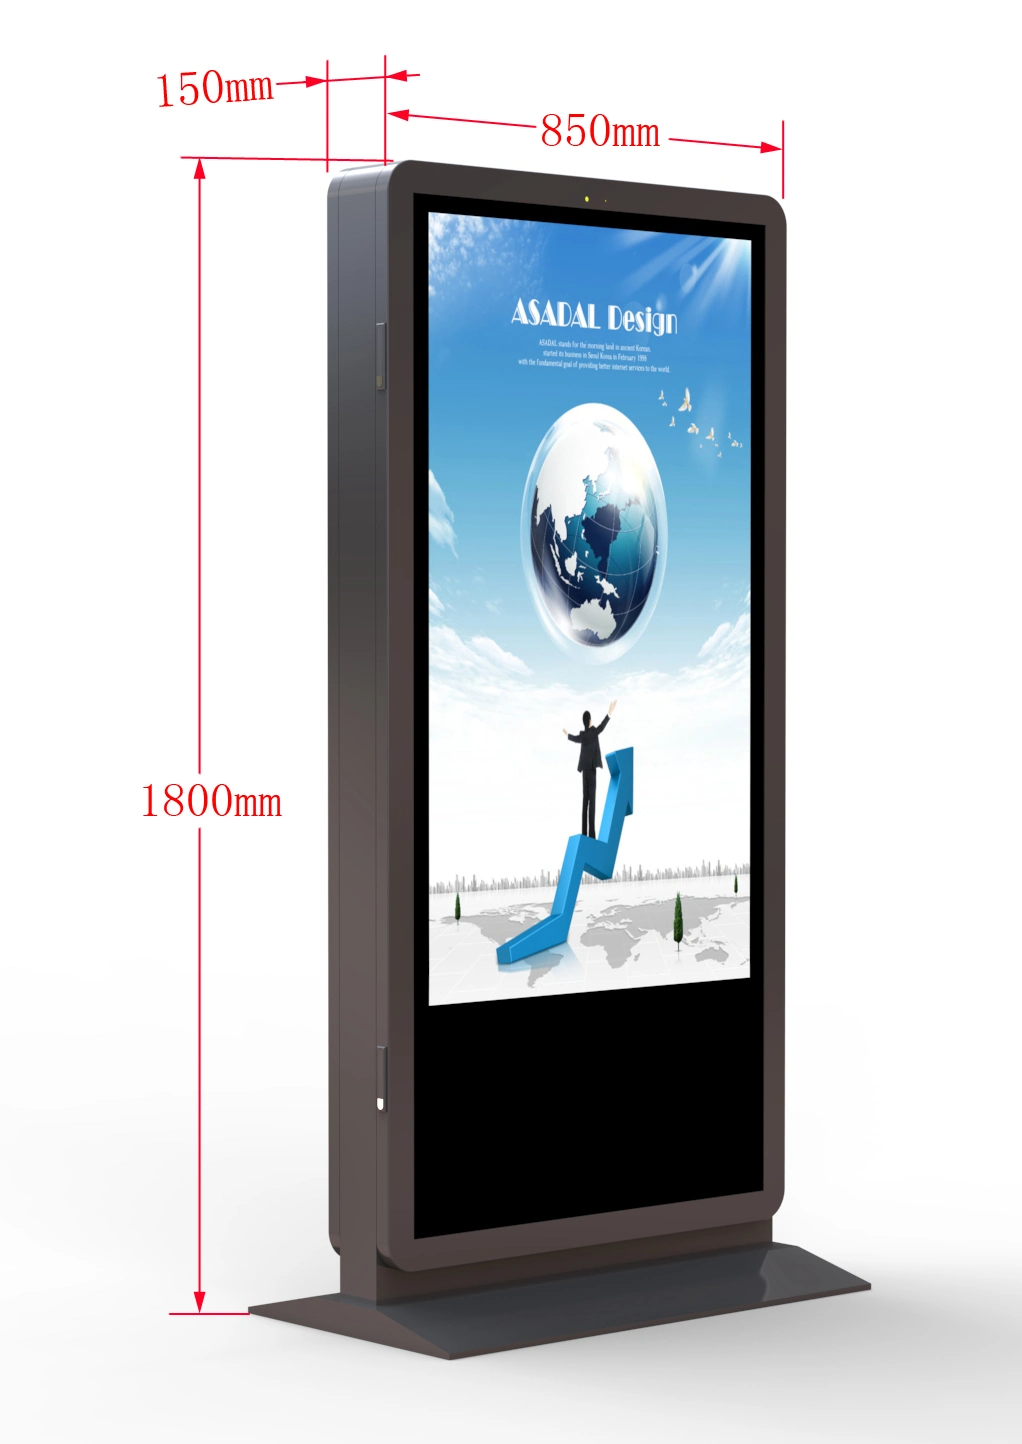 55 Inch Plug & Play Android Freestanding TFT LCD Digital Posters